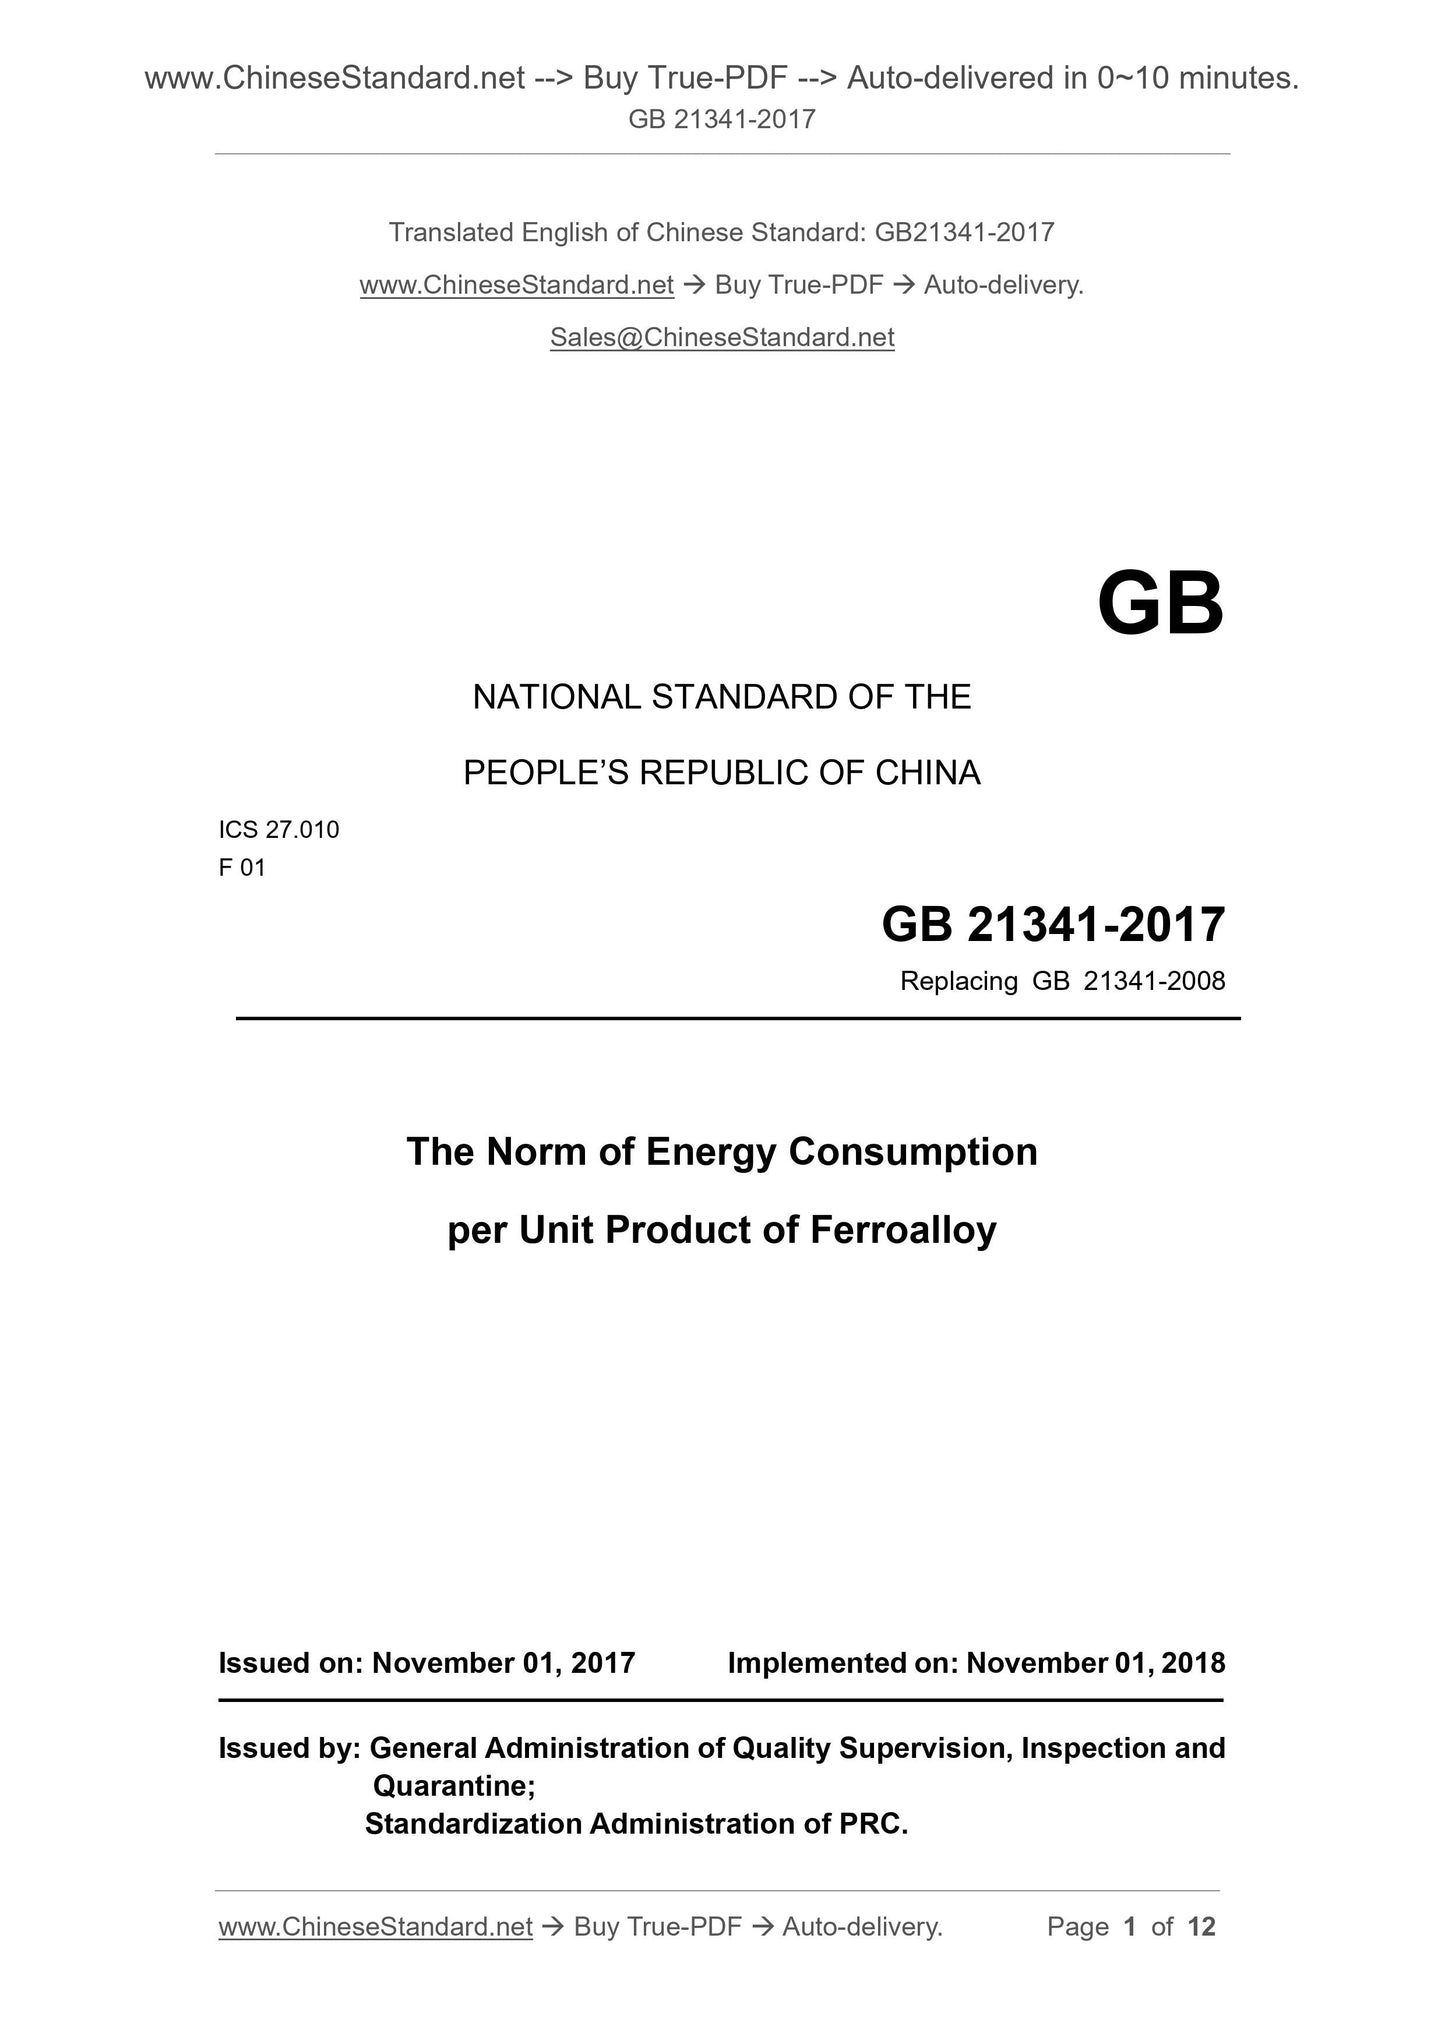 GB 21341-2017 Page 1